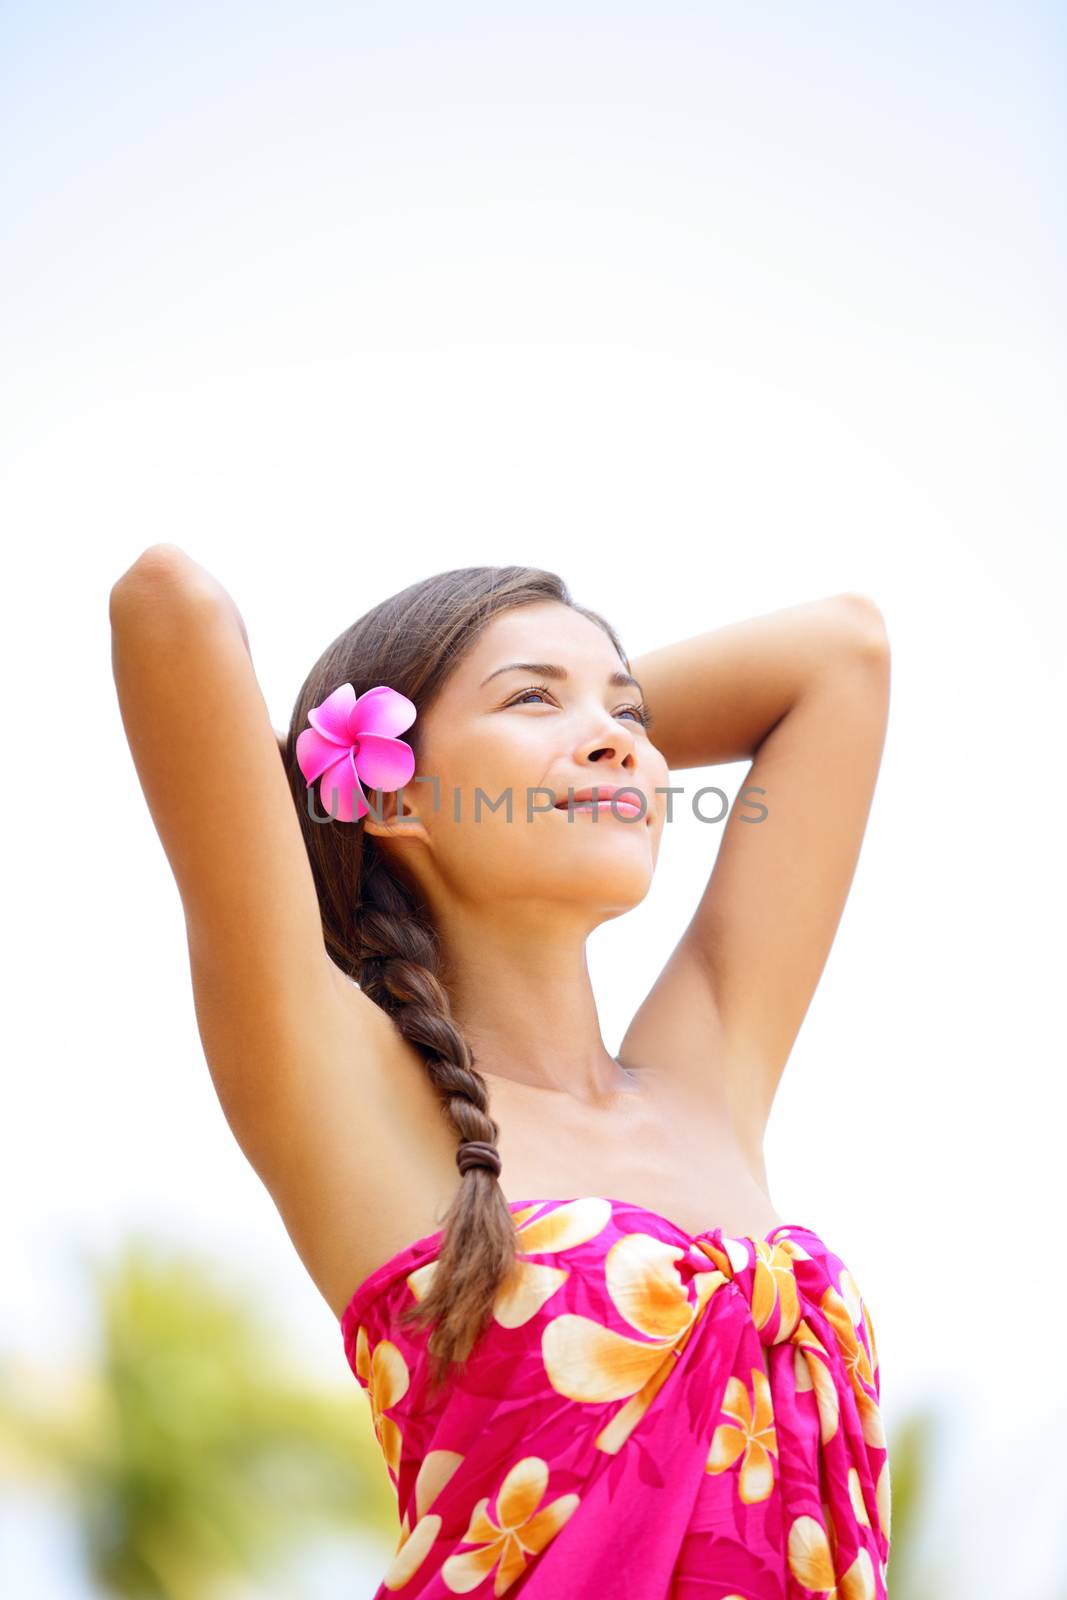 Spa ethnic mixed race pretty serene woman in sarong relaxed enjoying holiday - beach wellness on Hawaii in sun and warm, meditating arms up hands behind head